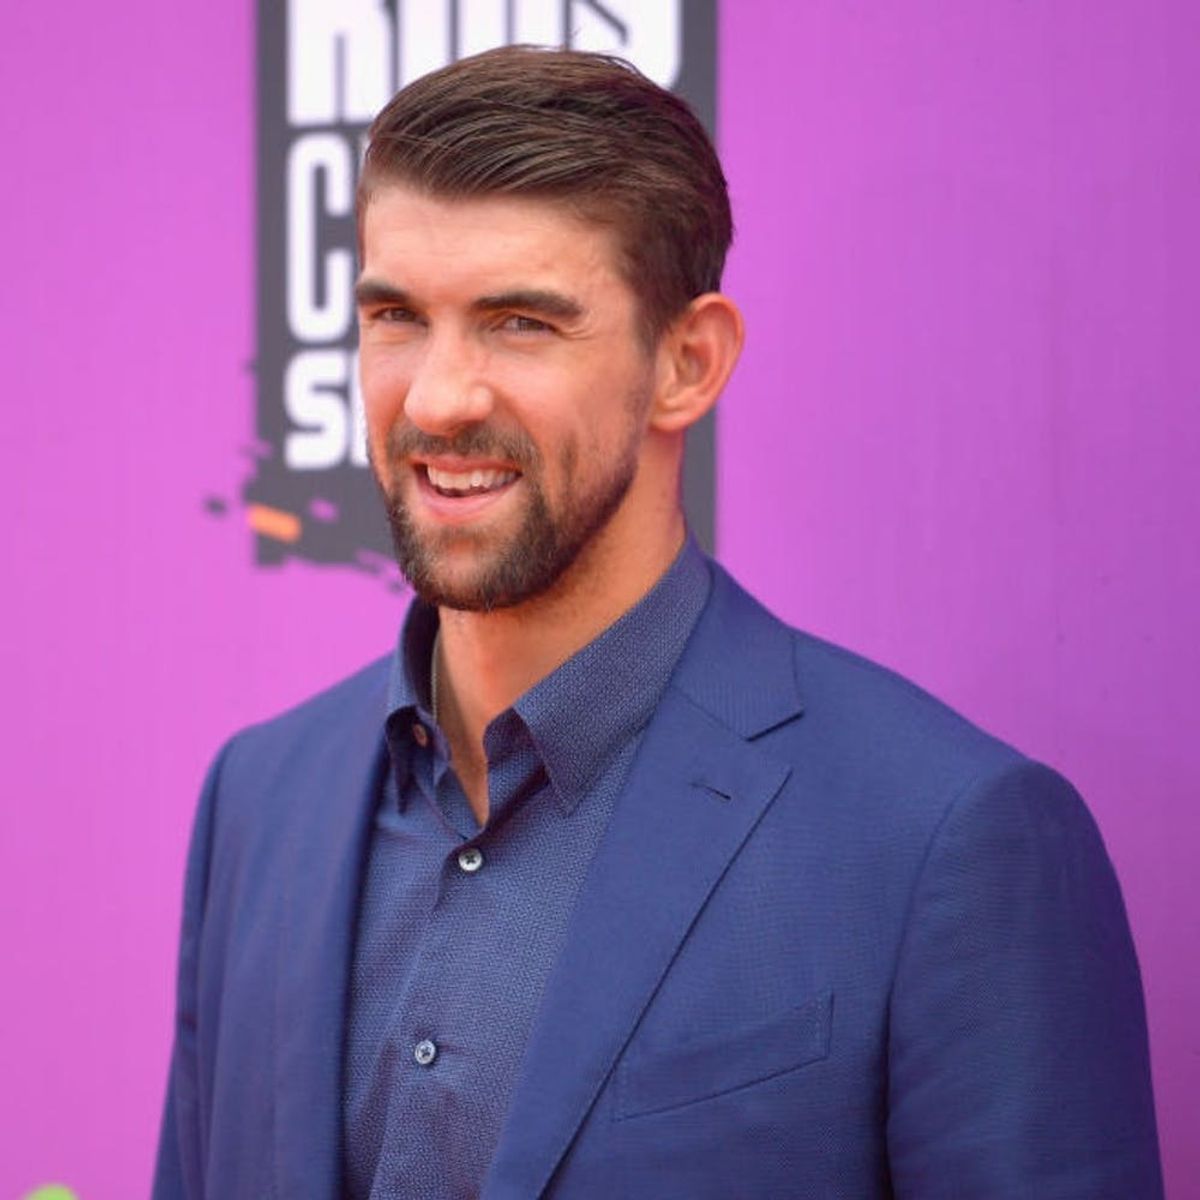 Michael Phelps Responds to the Shark Race “Haters”